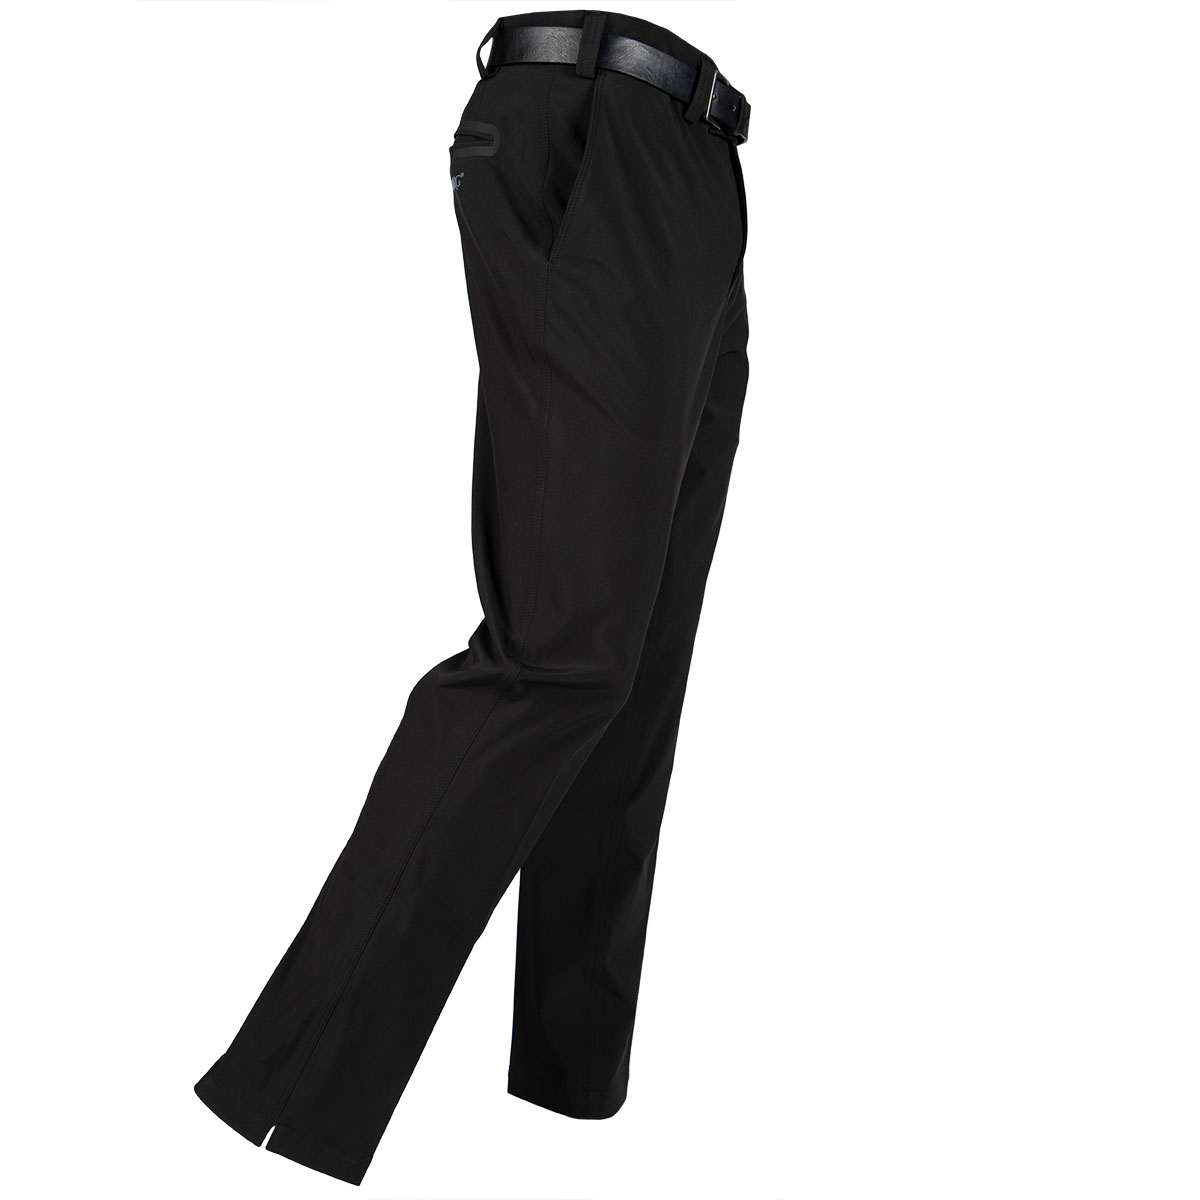 Callaway Golf Chev Tech OptiDri Trousers  Trousers from County Golf  Golf  Sale  Golf Clothing 